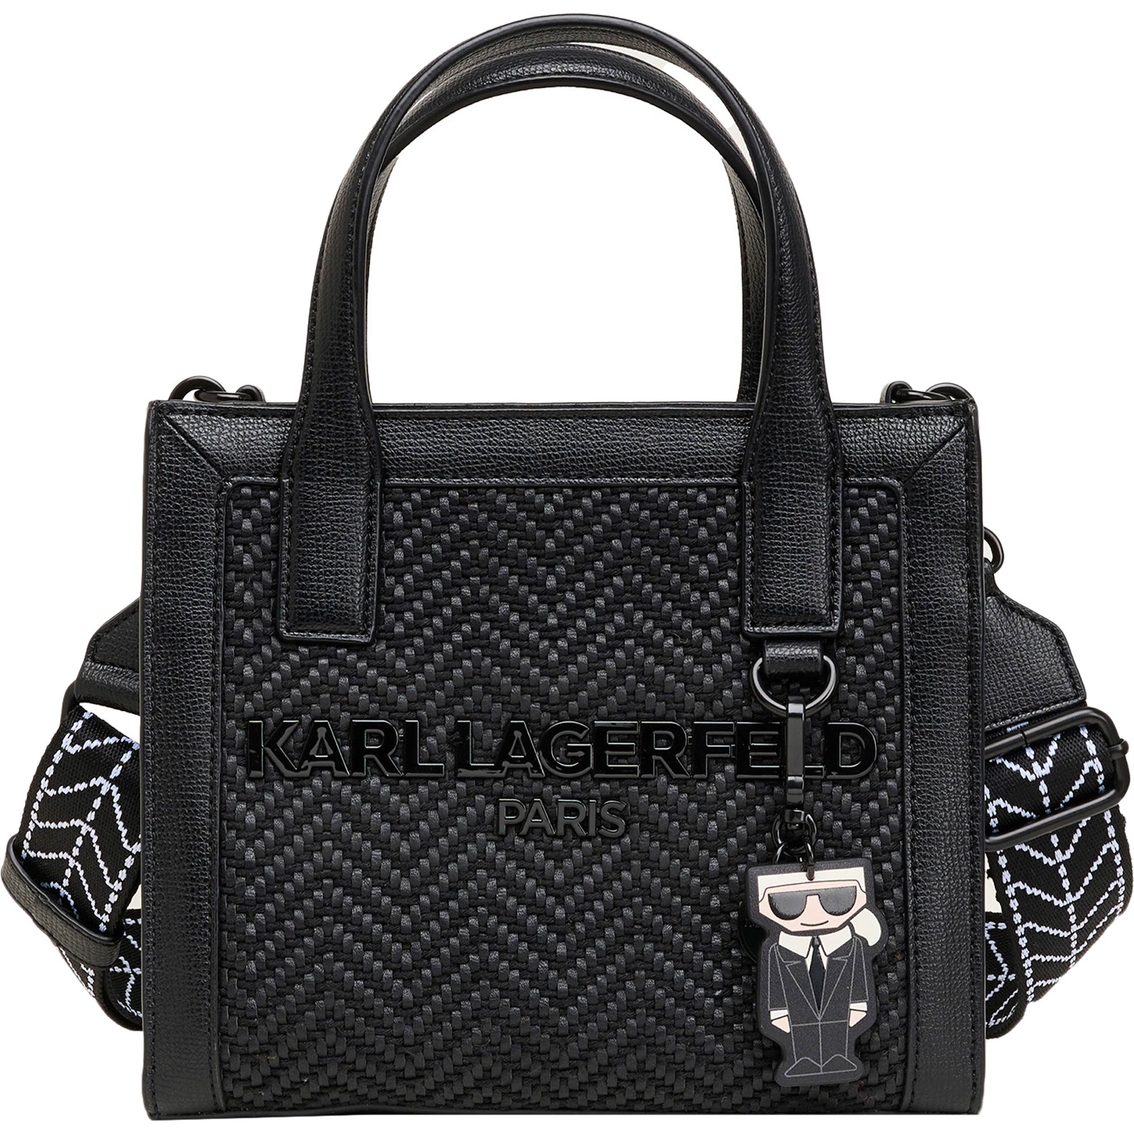 Karl Lagerfeld Nouveau Tote | Totes & Shoppers | Clothing & Accessories ...